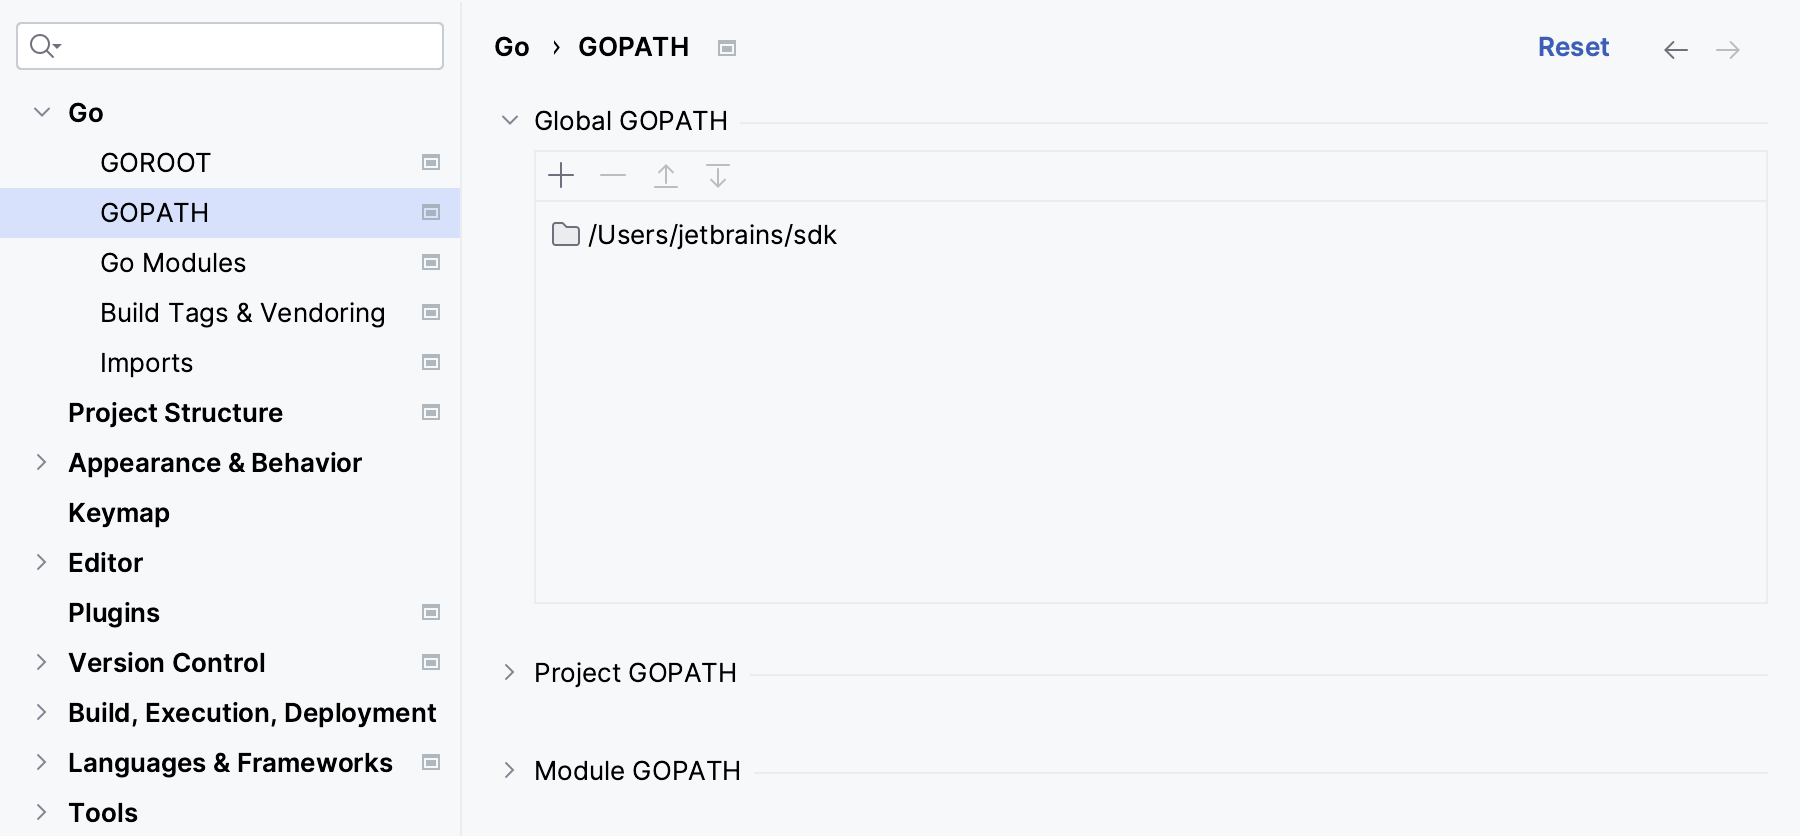 Configuring GOPATH for different scopes